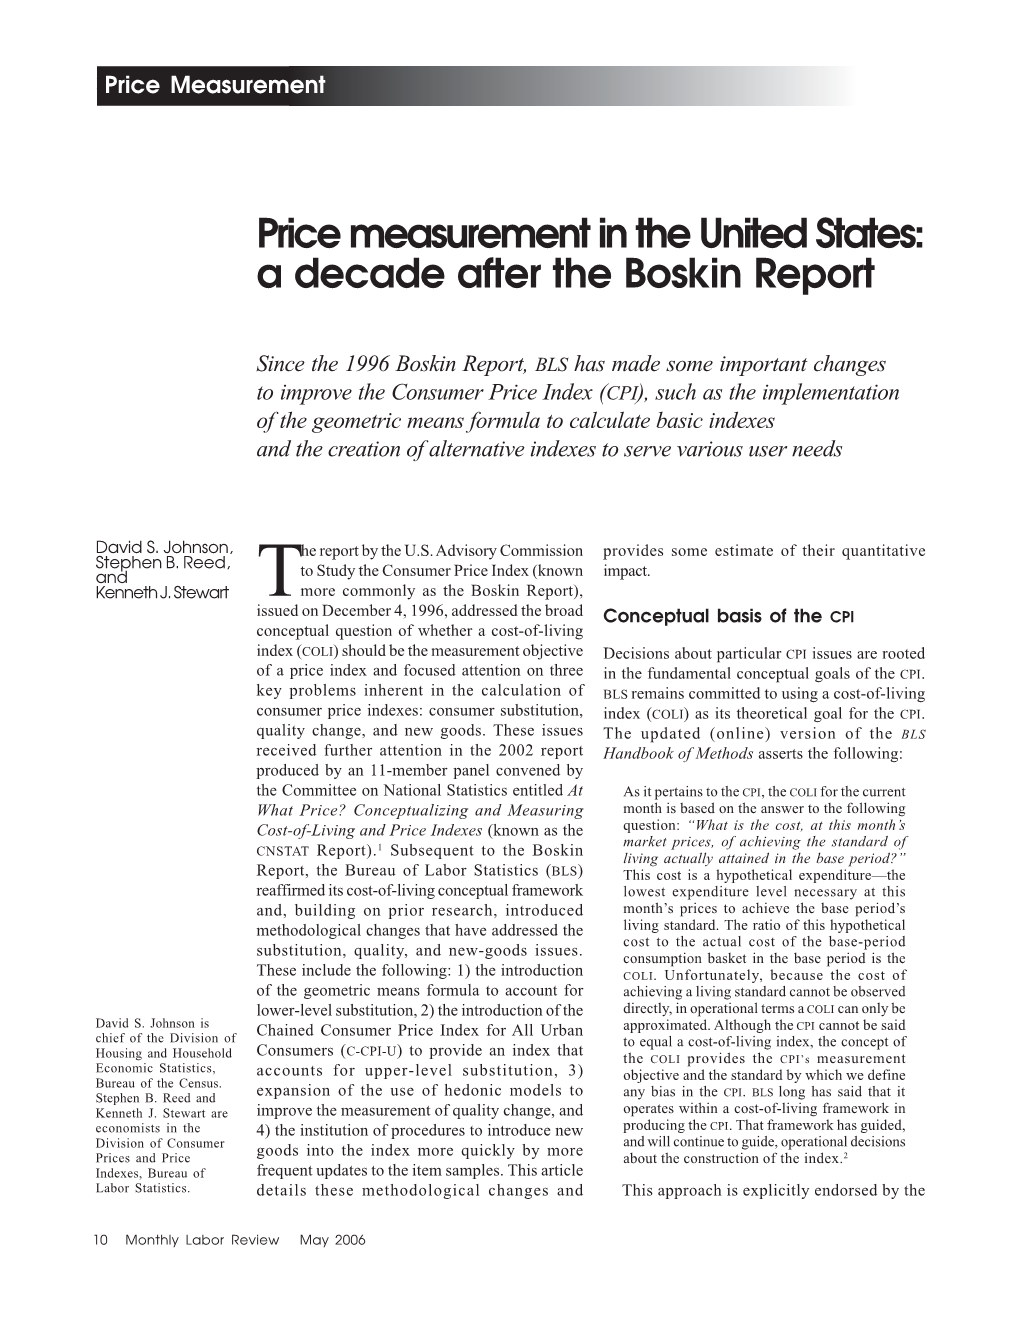 Price Measurement in the United States: a Decade After the Boskin Report